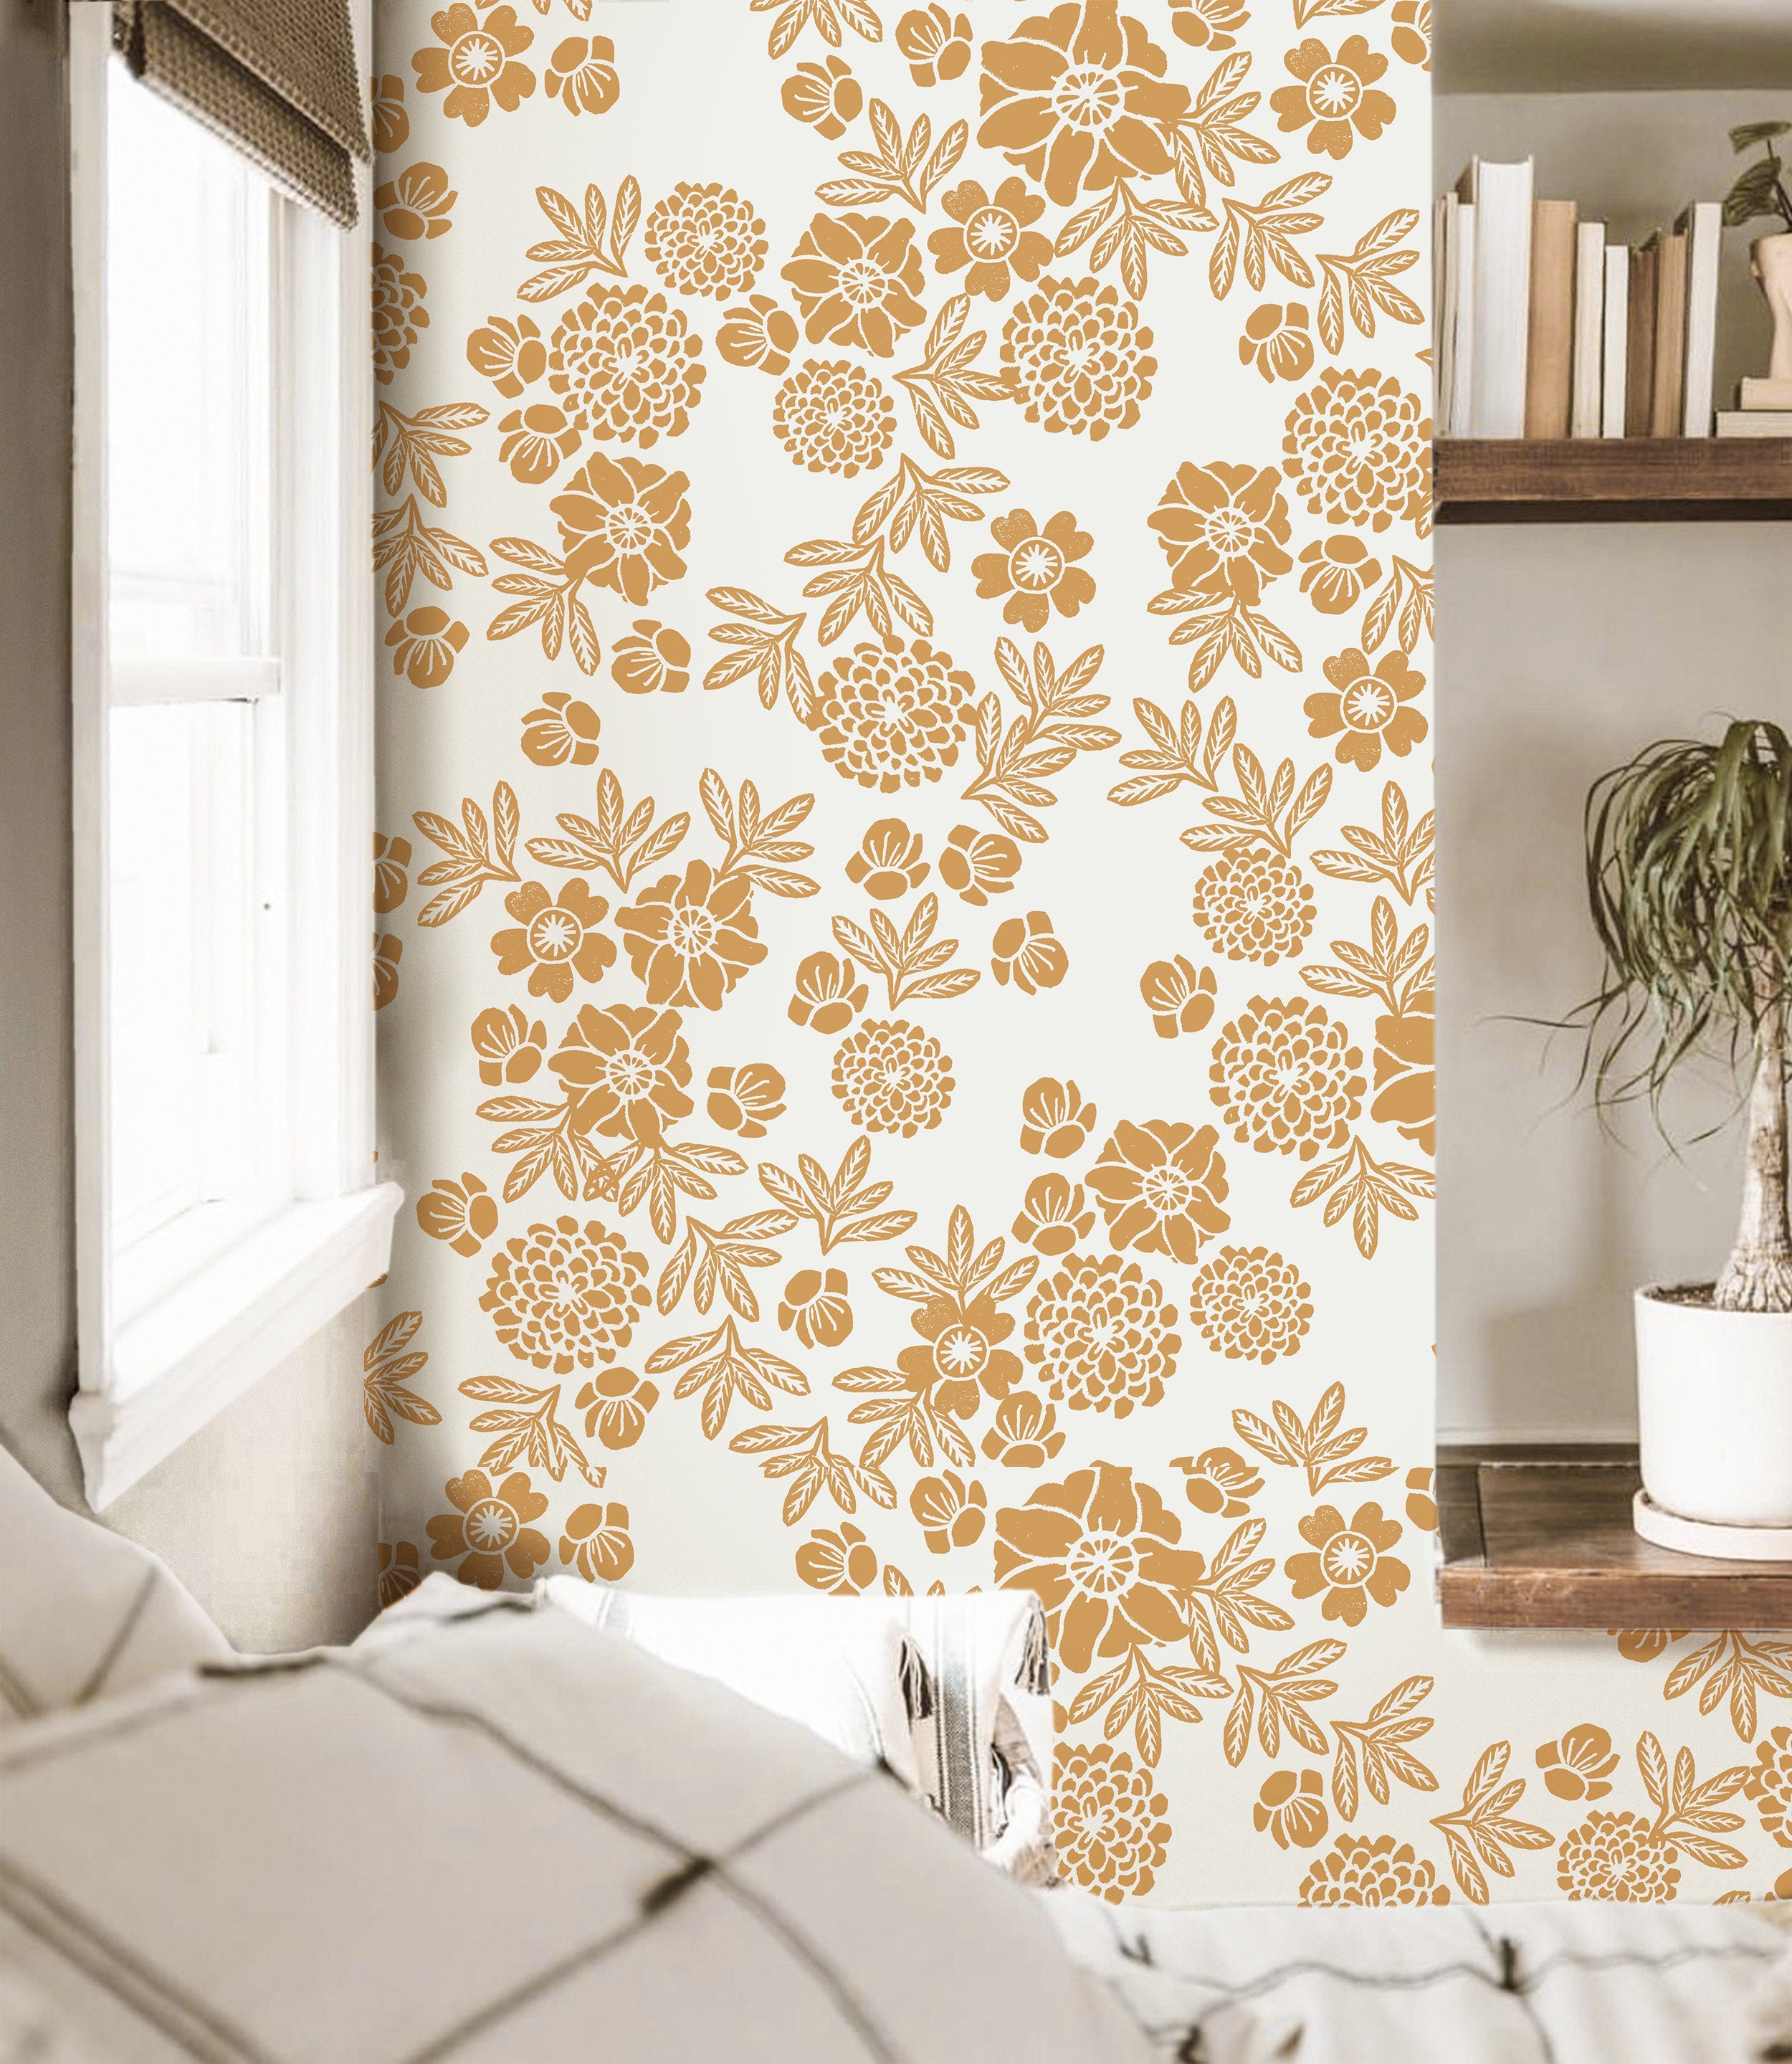 Wallpaper Peel and Stick Wallpaper Golden Yellow Stamped Floral Removable Wallpaper Wall Decor Home Decor Wall Art Room Decor 3745 - JamesAndColors